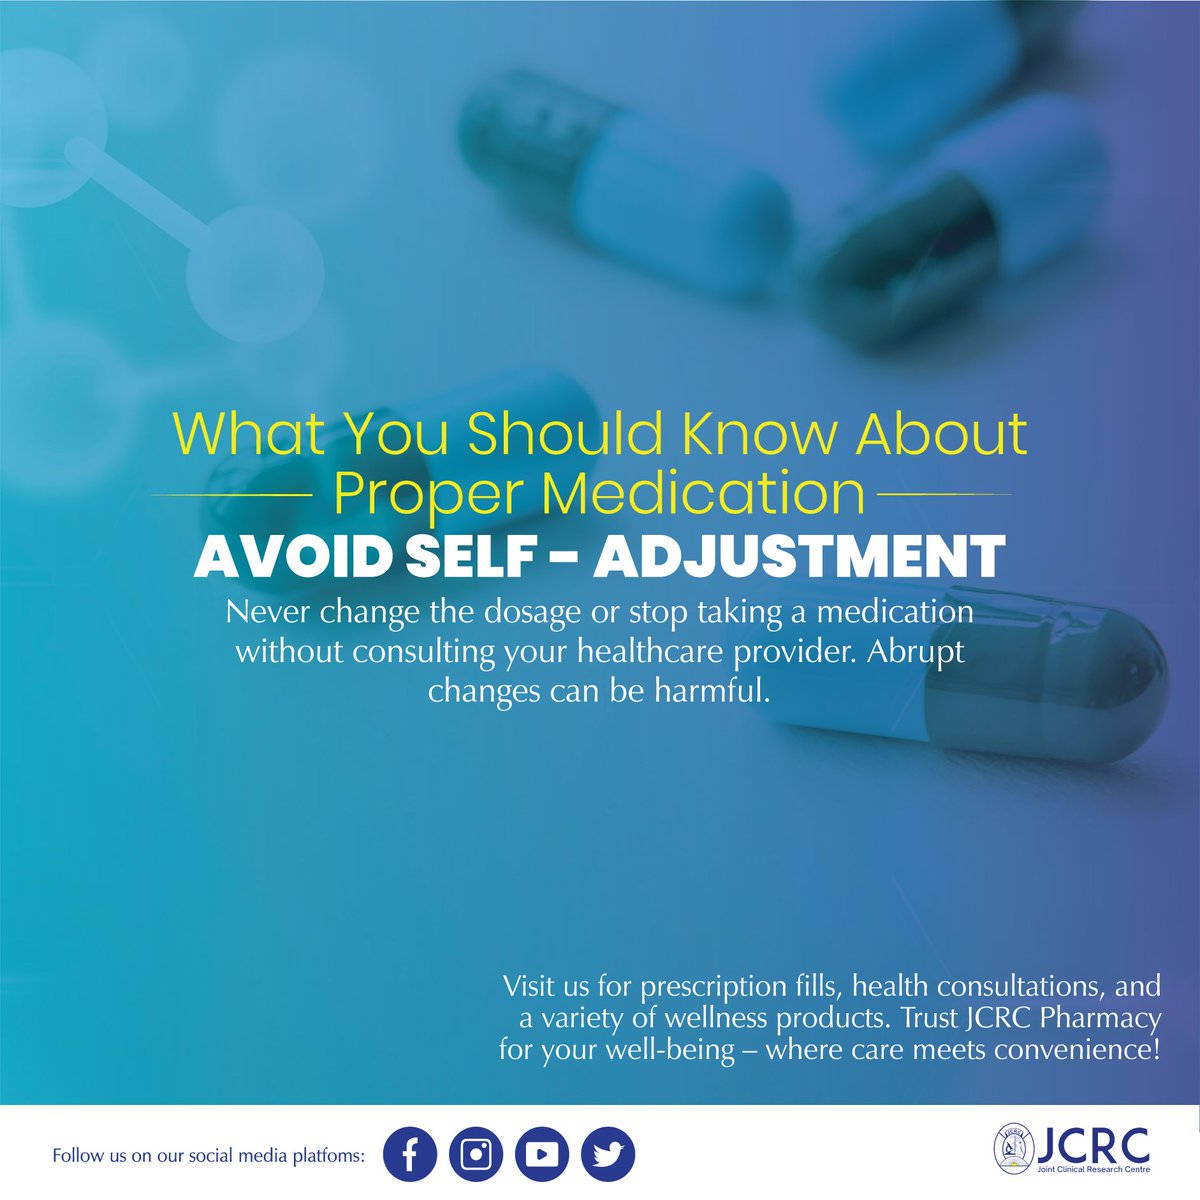 Here is what you should know about proper medication. Visit us for prescription fills, health consultations, and a variety of wellness products. Trust JCRC Pharmacy for your well-being – where care meets convenience! #YourLifeMatters